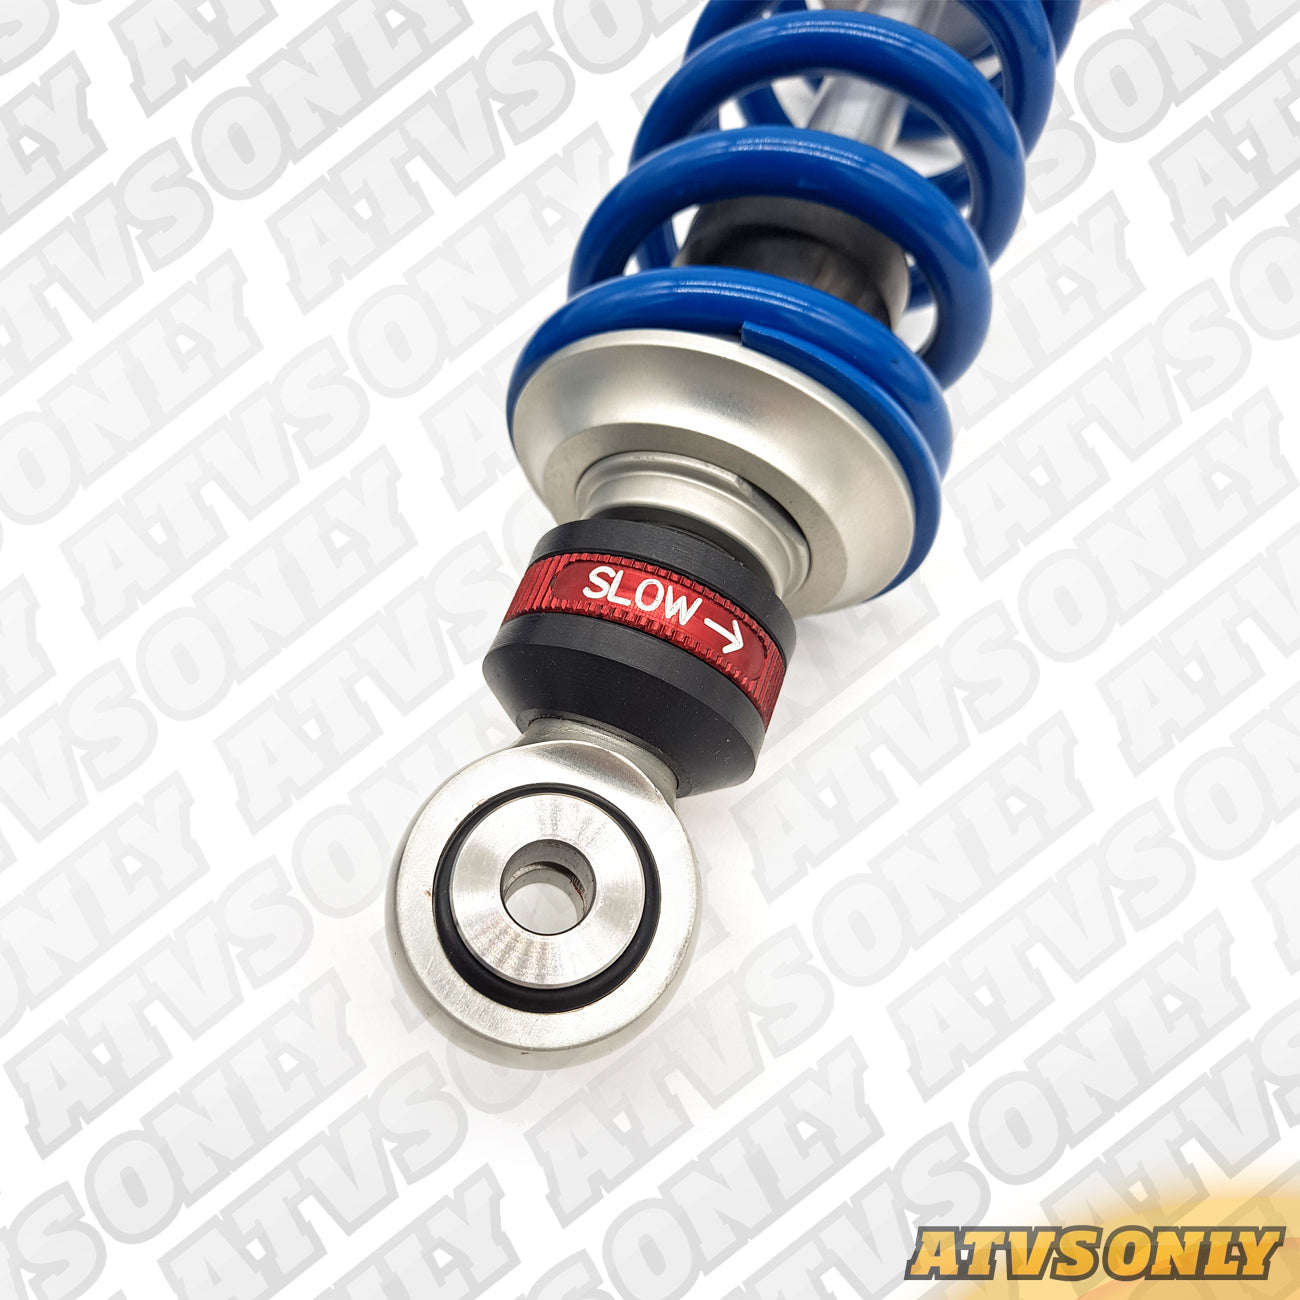 Suspension - PEP PB-1 Front Shock Absorbers